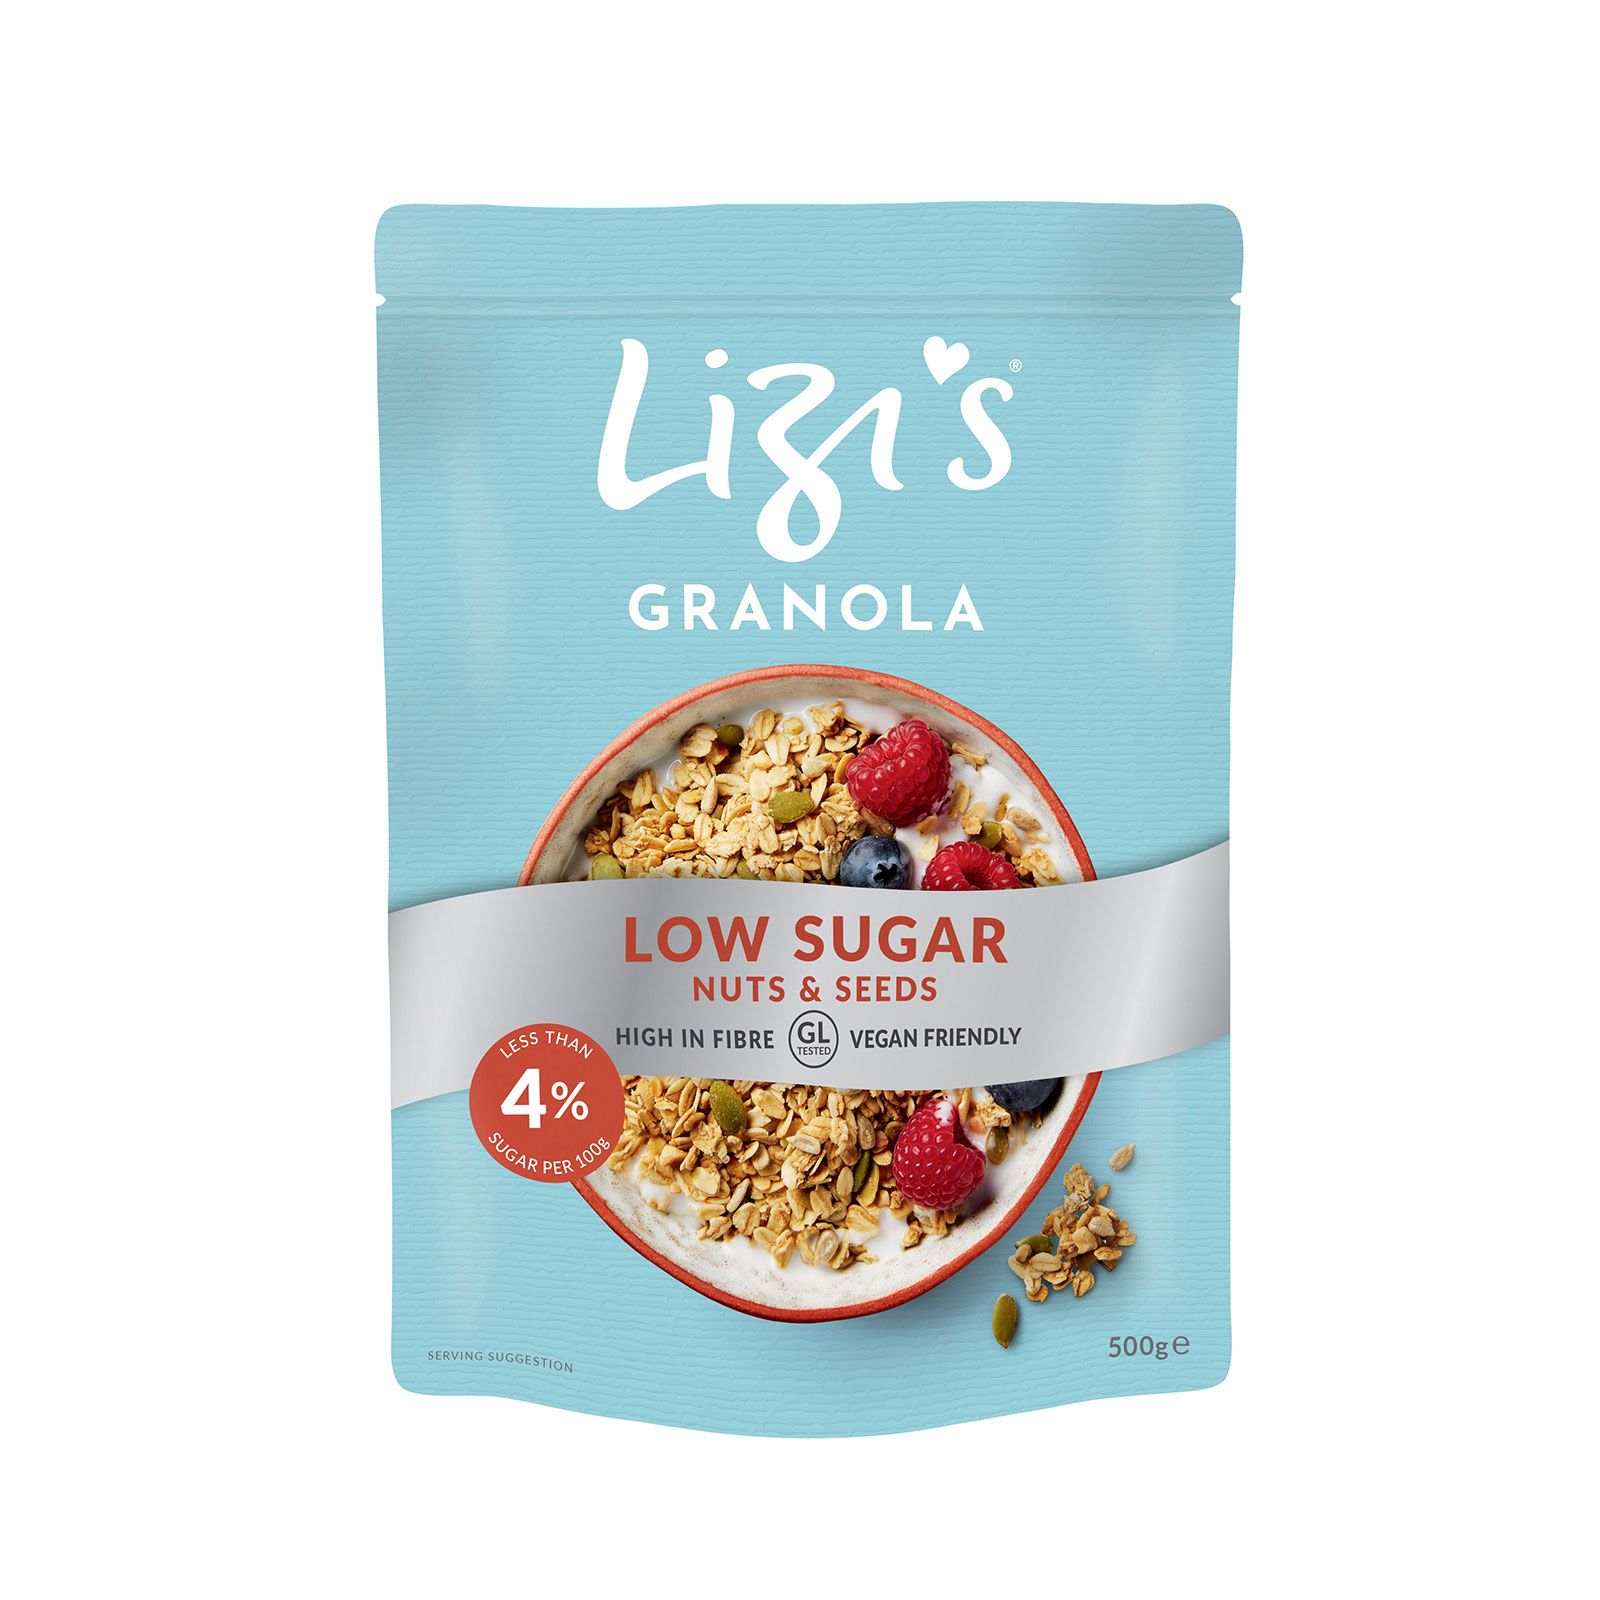 Low Sugar Nuts and Seeds Granola - Image